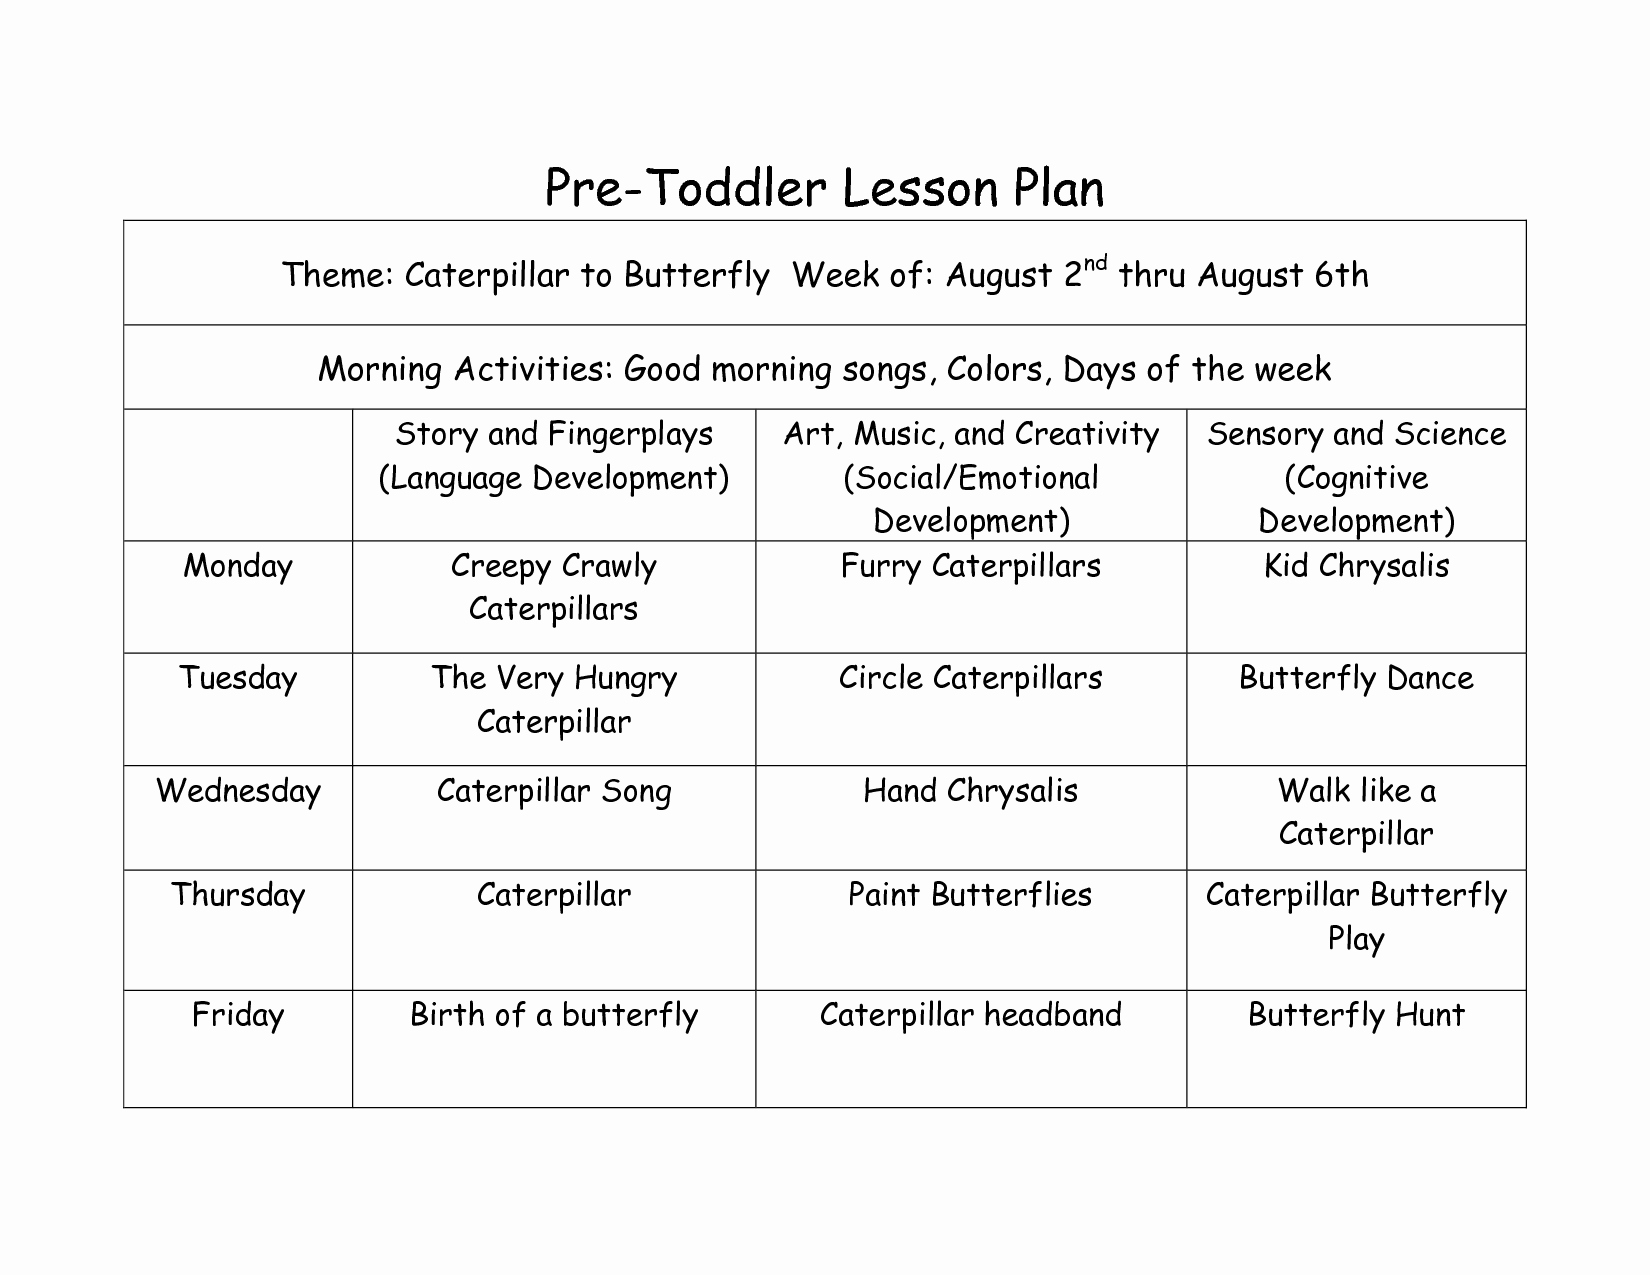 Google Lesson Plan Template Awesome Creative Curriculum Lesson Plan Template Google Search